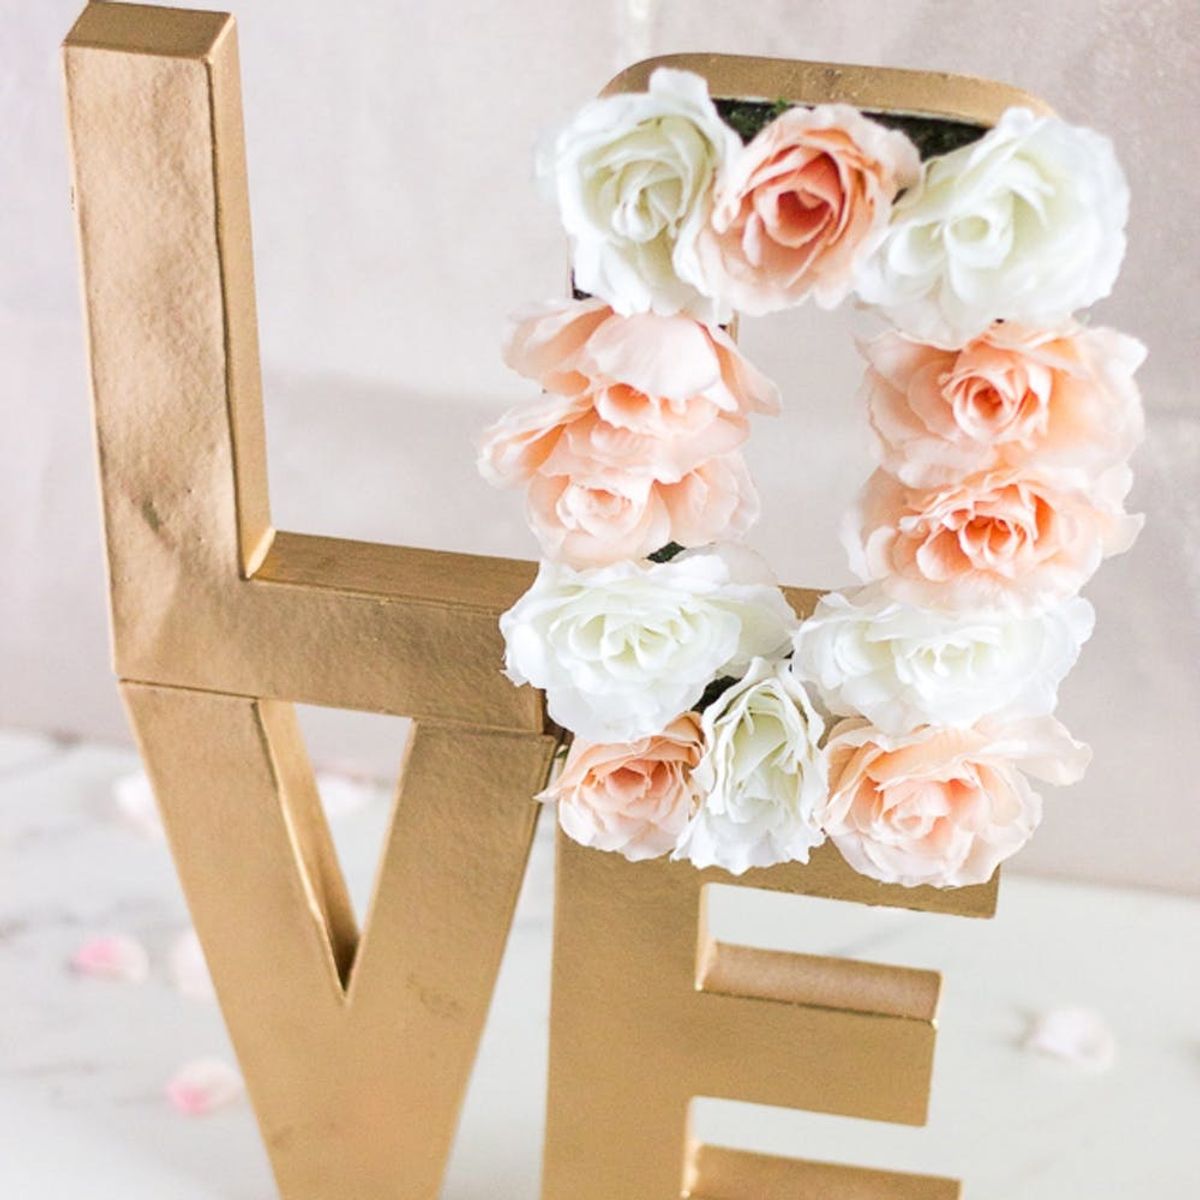 And the Winners of Our DIY Wedding Contest Are…